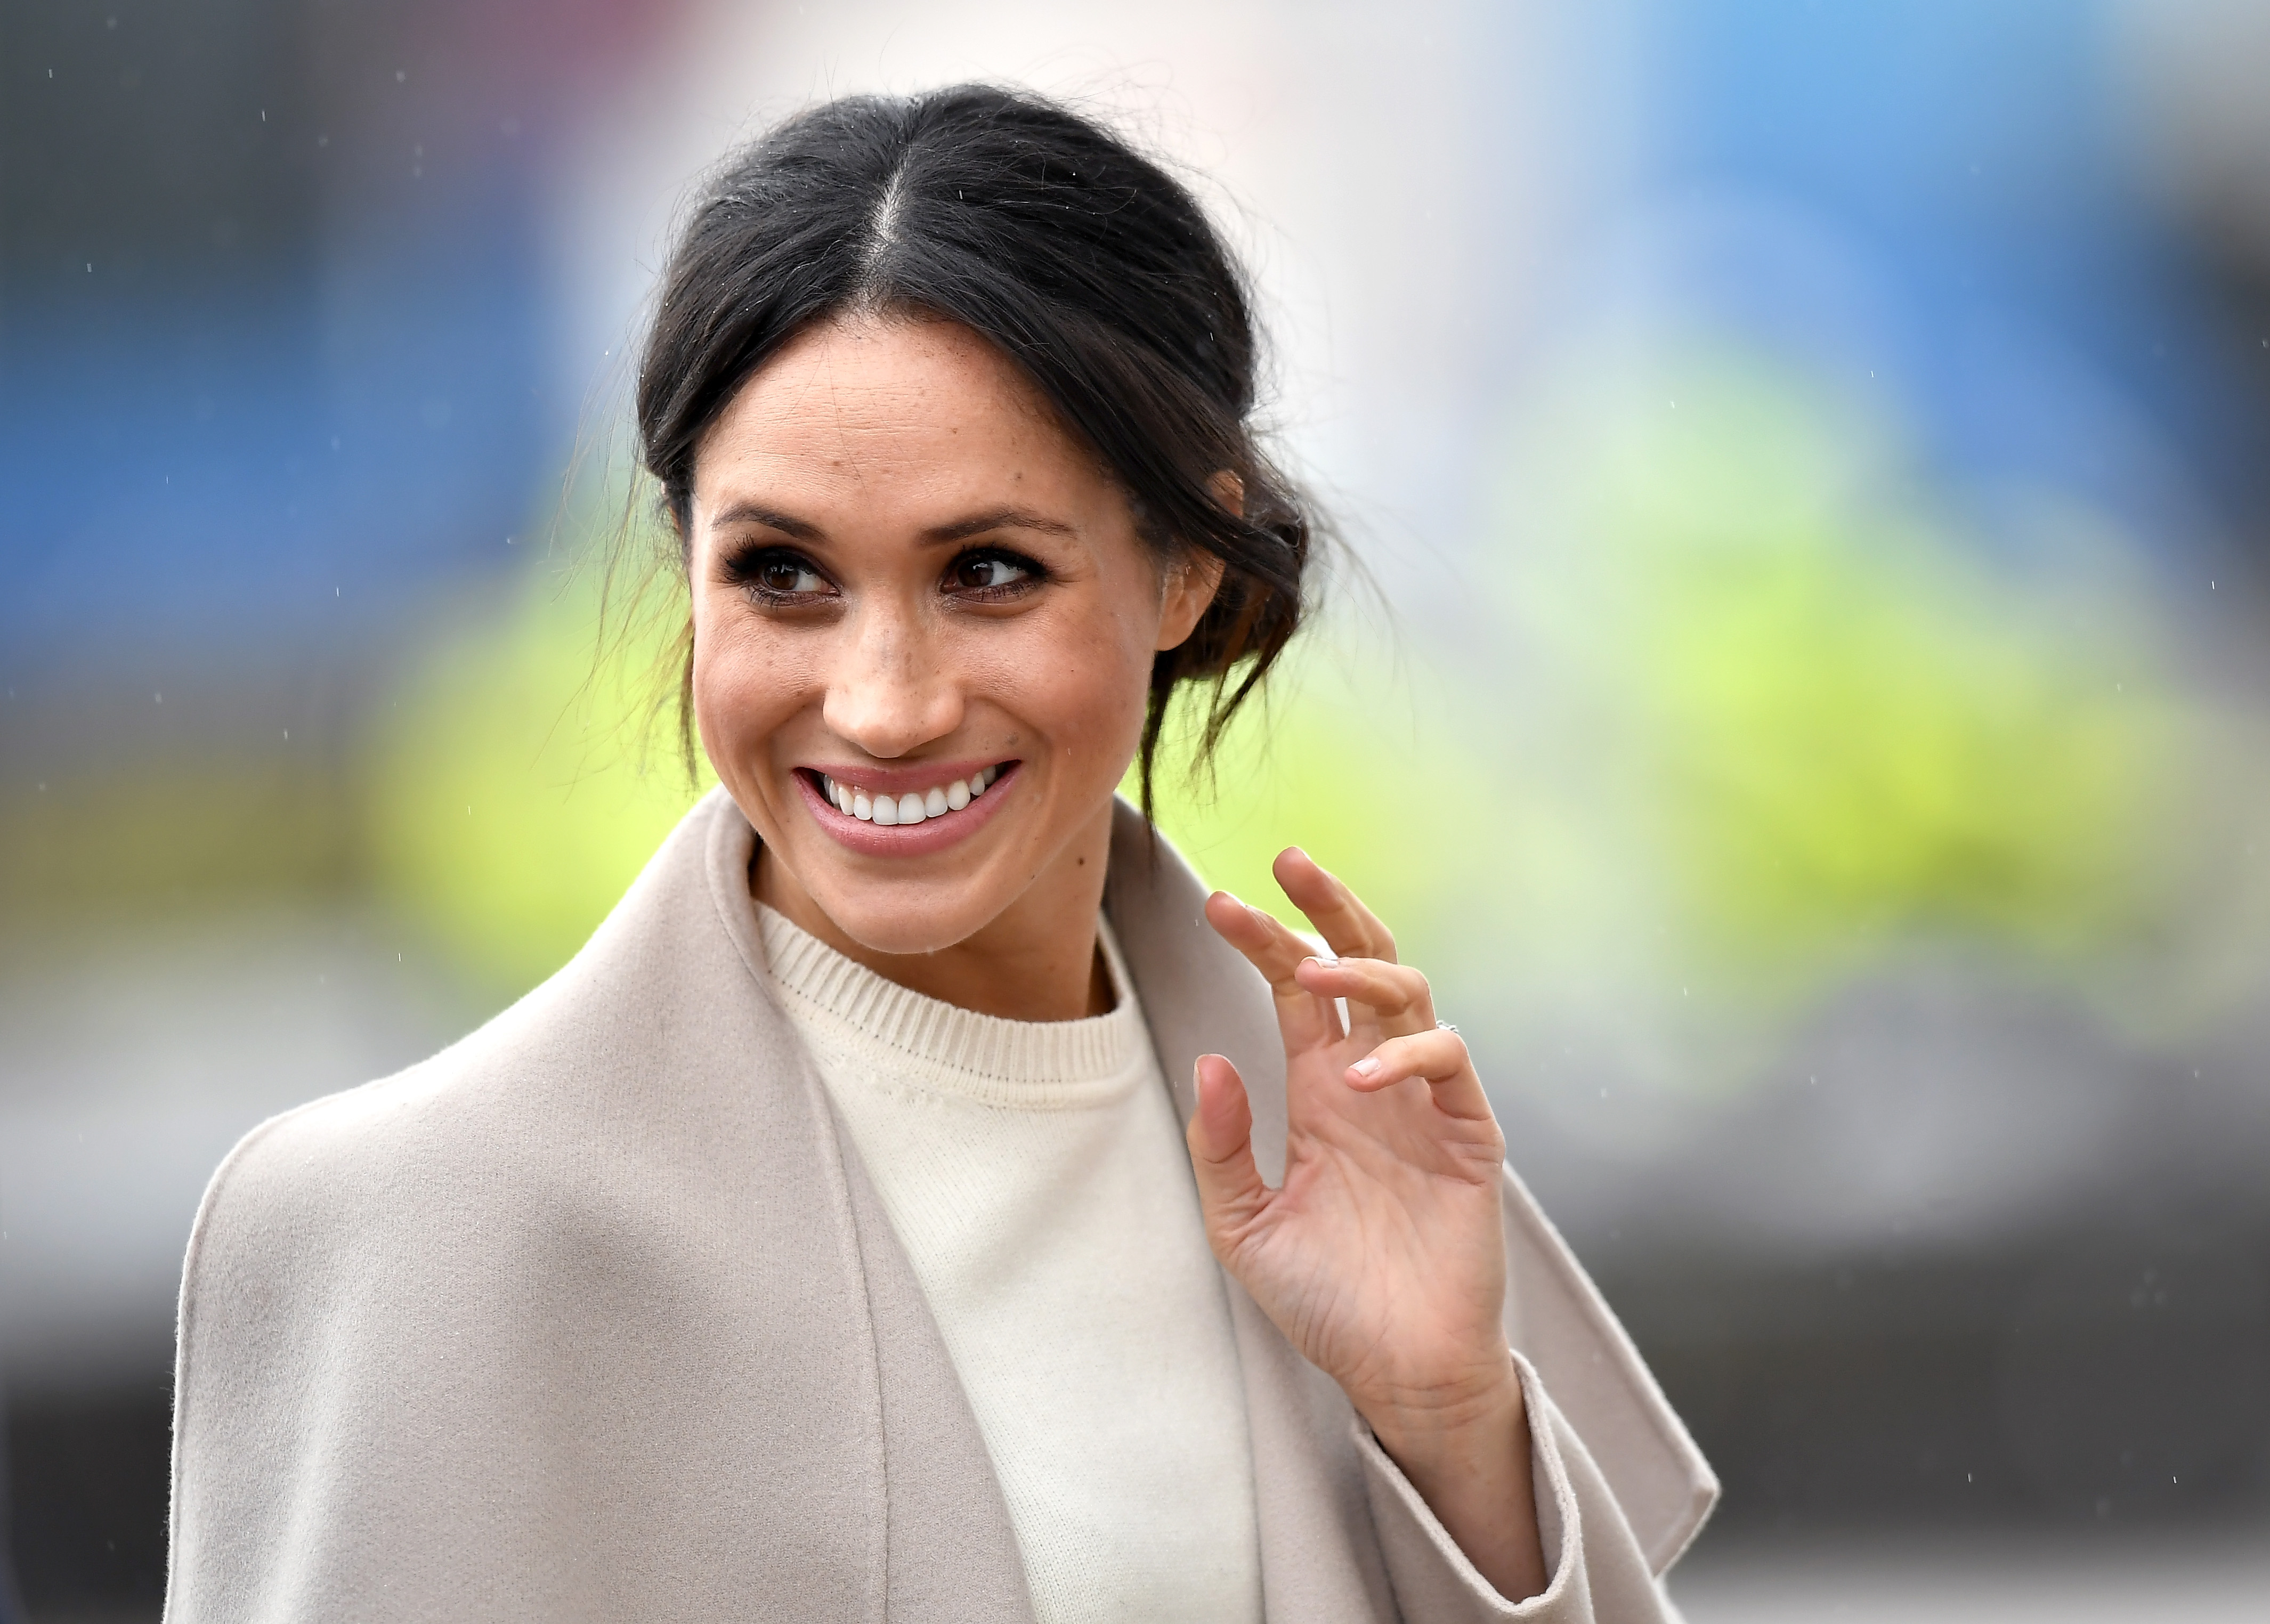 Meghan Markle during a trip to Northern Ireland on March 23, 2018 in Belfast, Northern Island. | Source: Getty Images